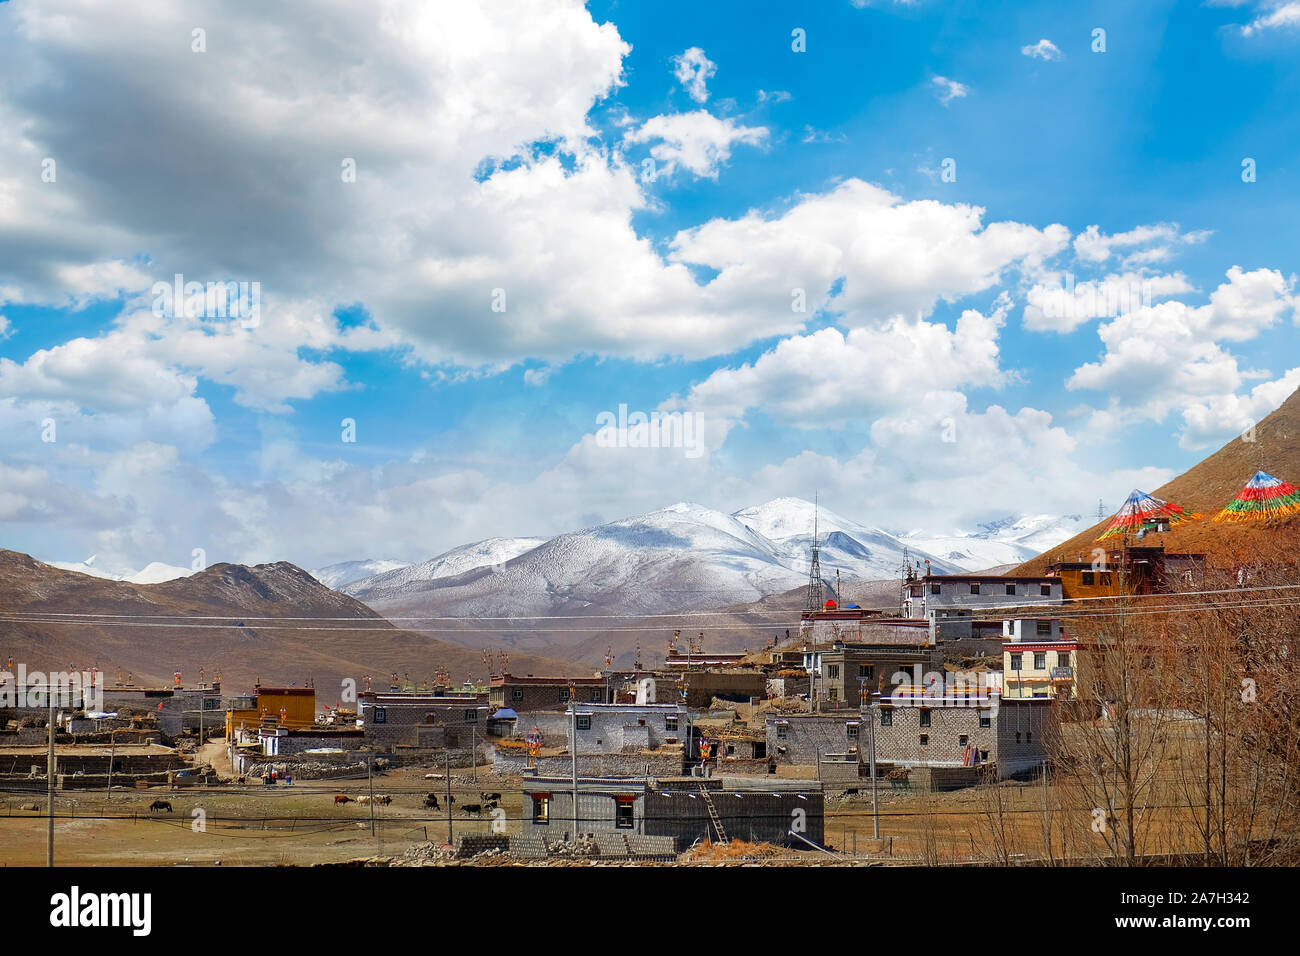 View of traditional Tibetan village against the Himalayan Mountains, against a blue sky covered by white clouds. Stock Photo